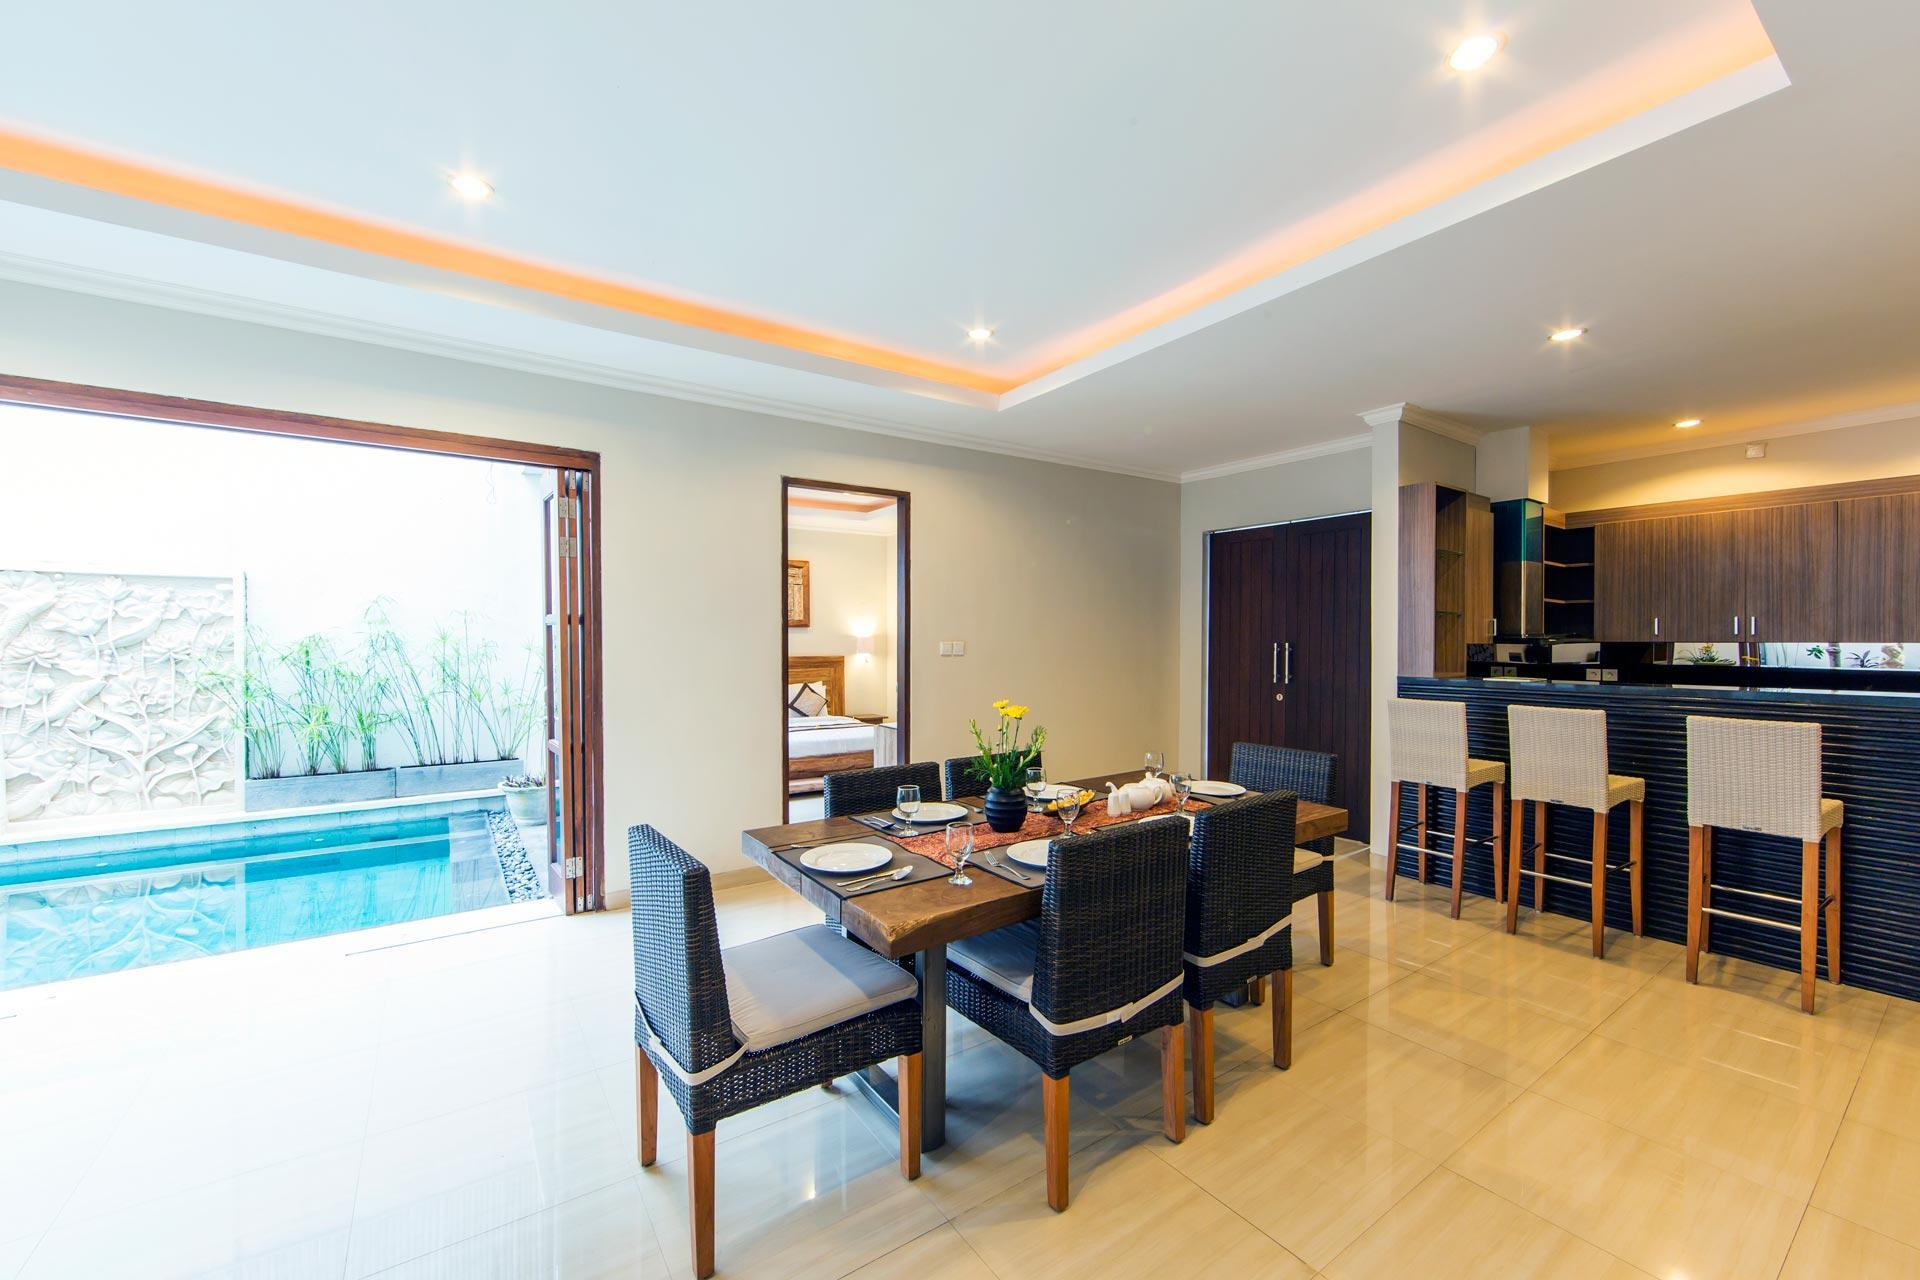 Food & Drinks, Fabulous 3 BR Villa with Private Pool #V298, Badung